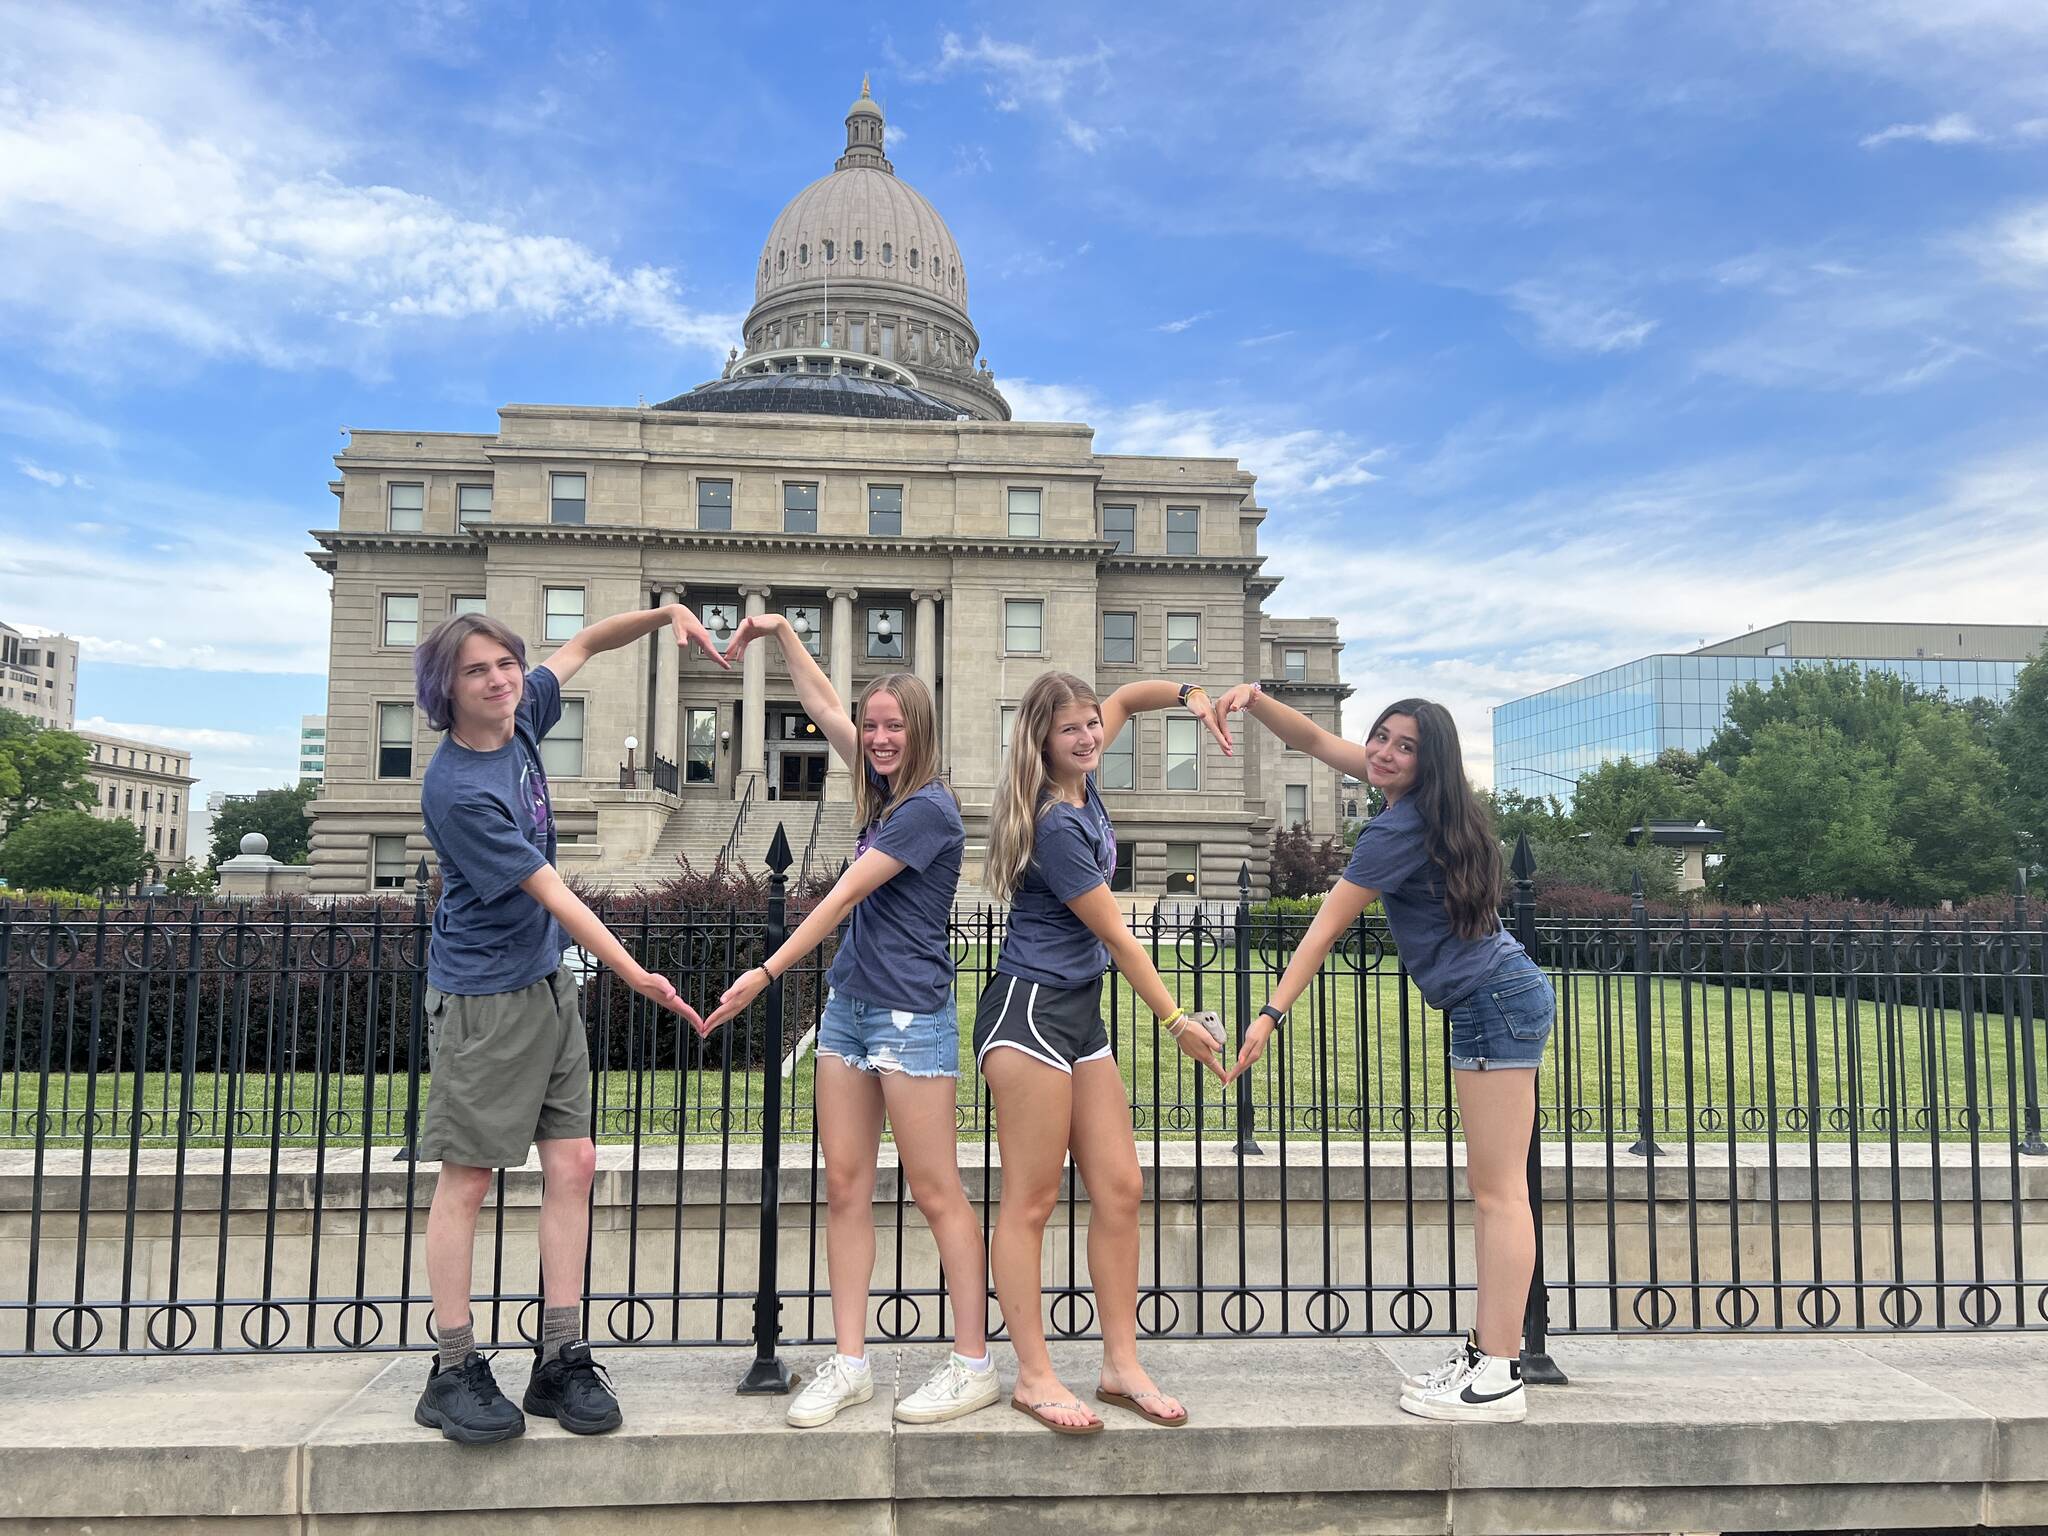 OPALCO/Contributed photo
The delegation at the Capitol of Idaho included (L-R) Satchel Bourne, McKenna Clark, August Moore, Valeria Villareal.